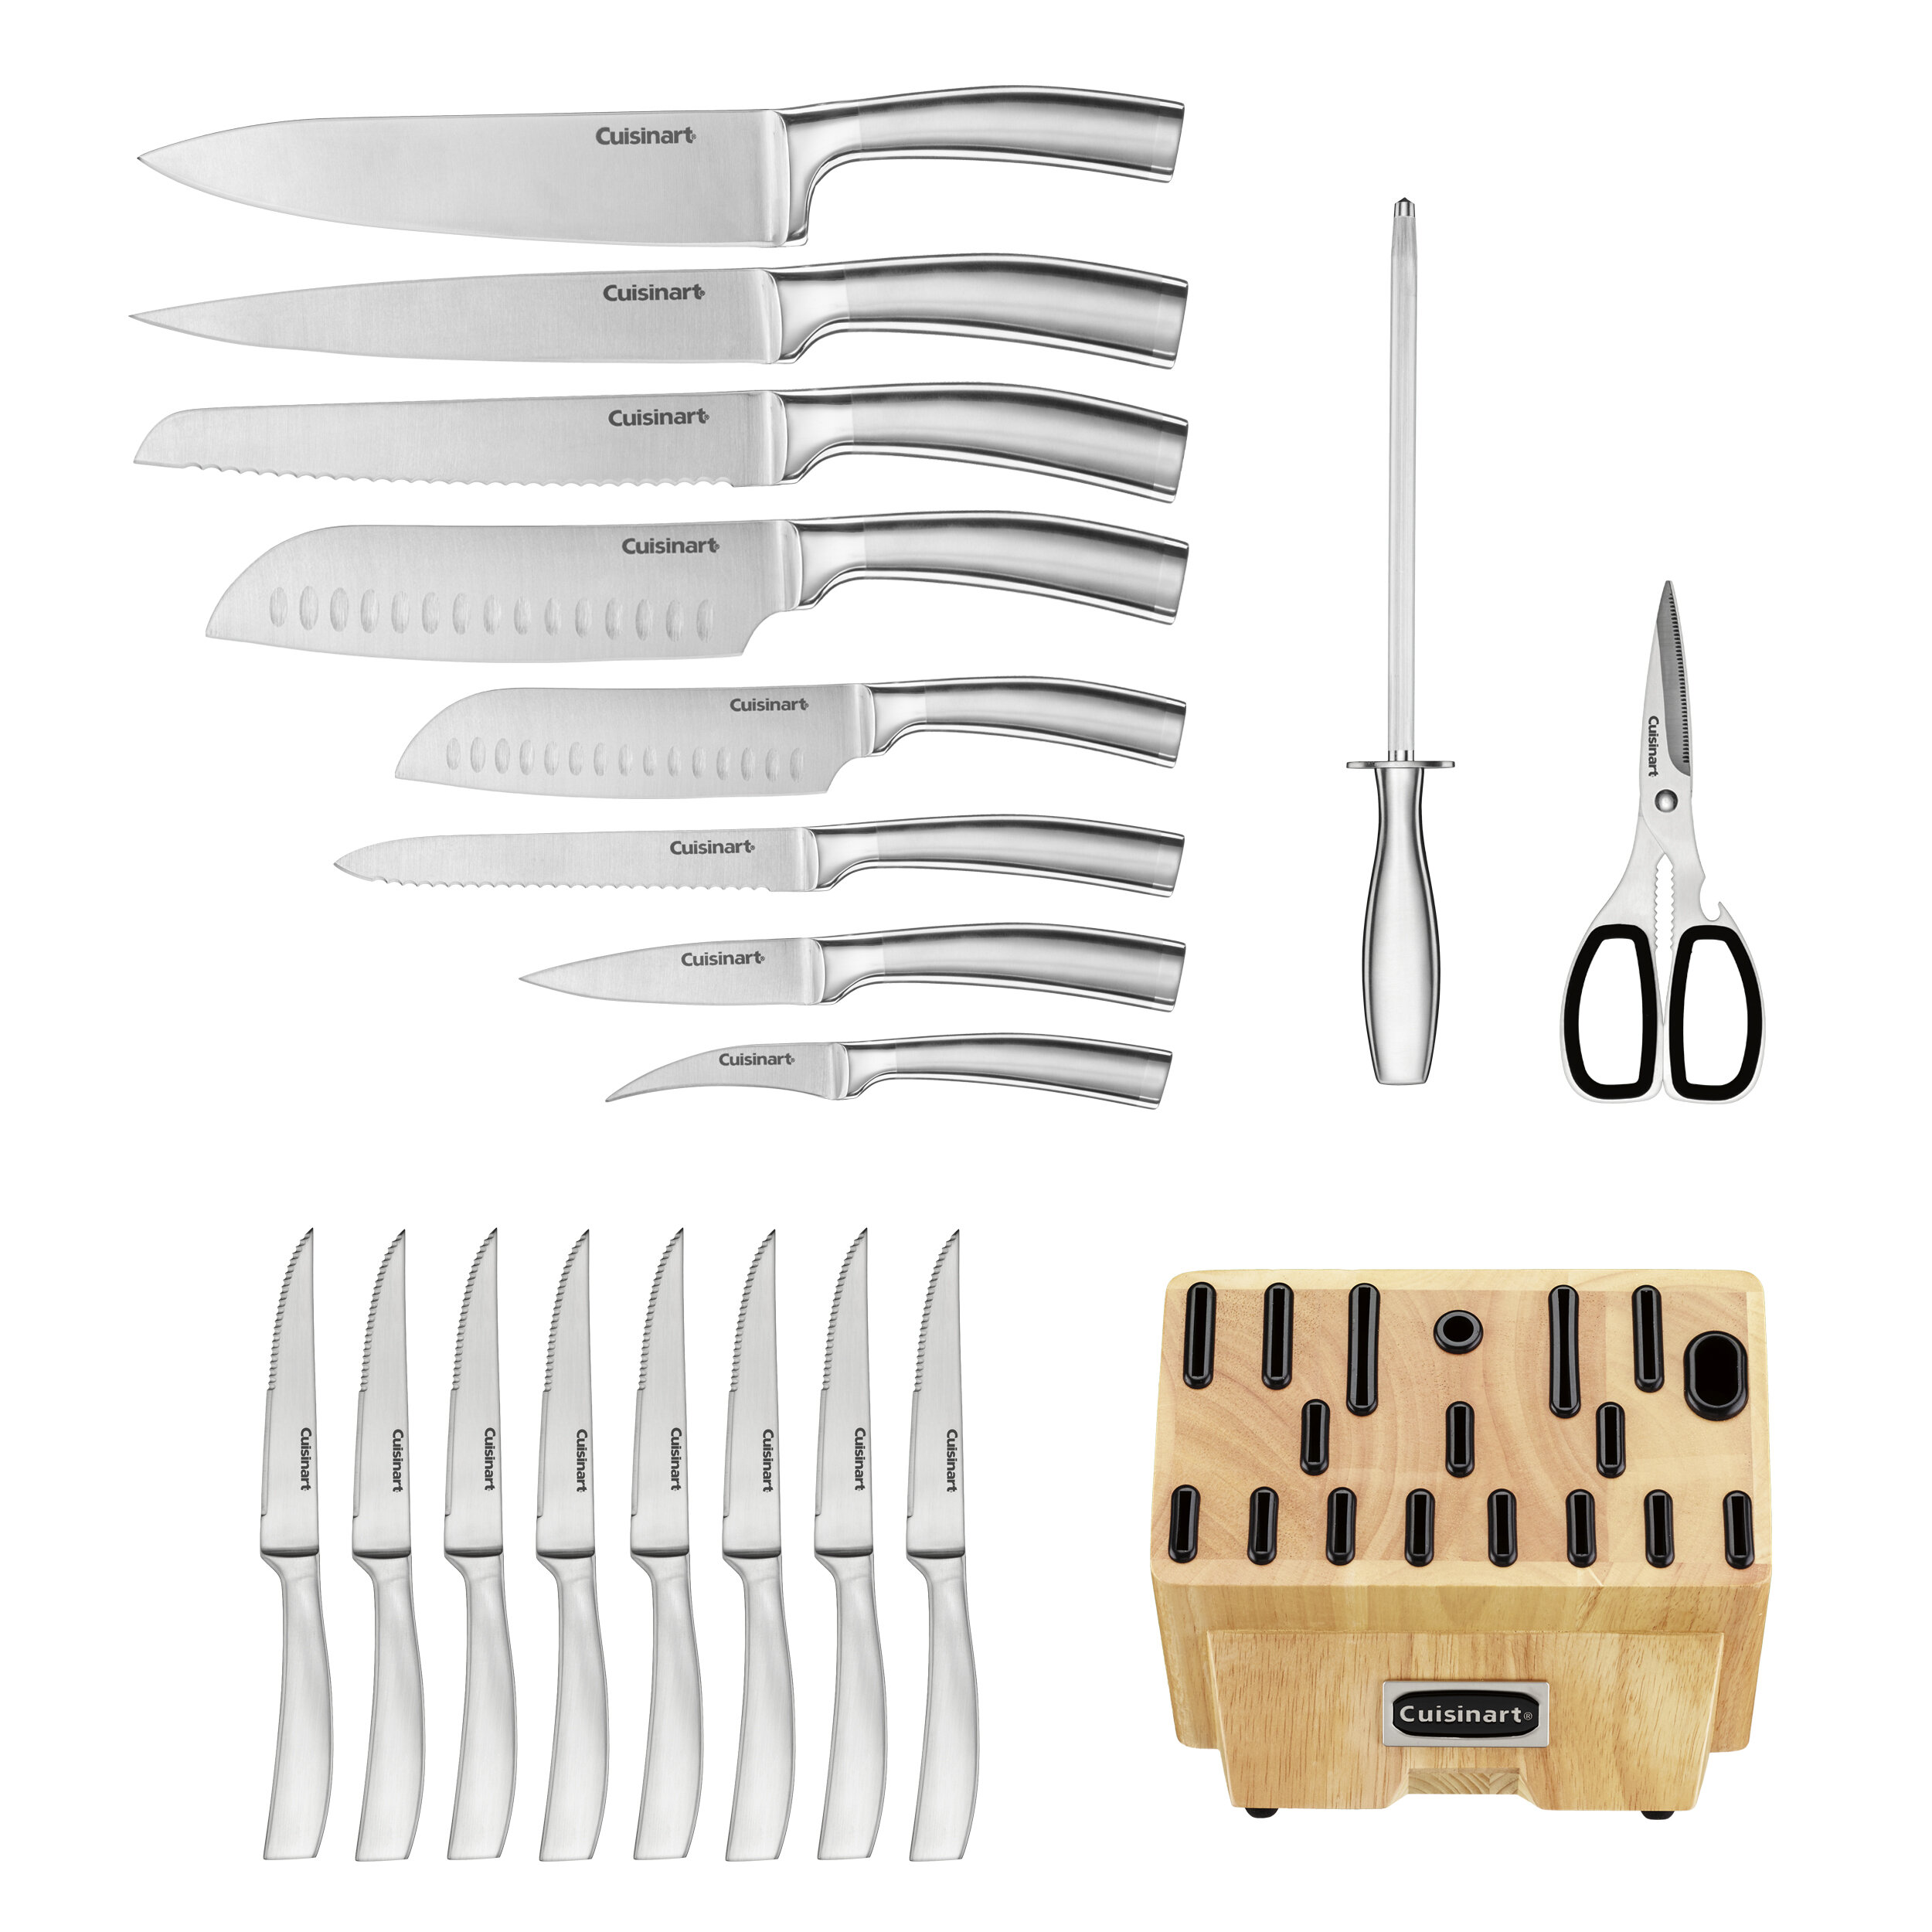 Details about   Cuisinart C77SS-19P Normandy 19 Piece Cutlery Block Set Stainless Steel 